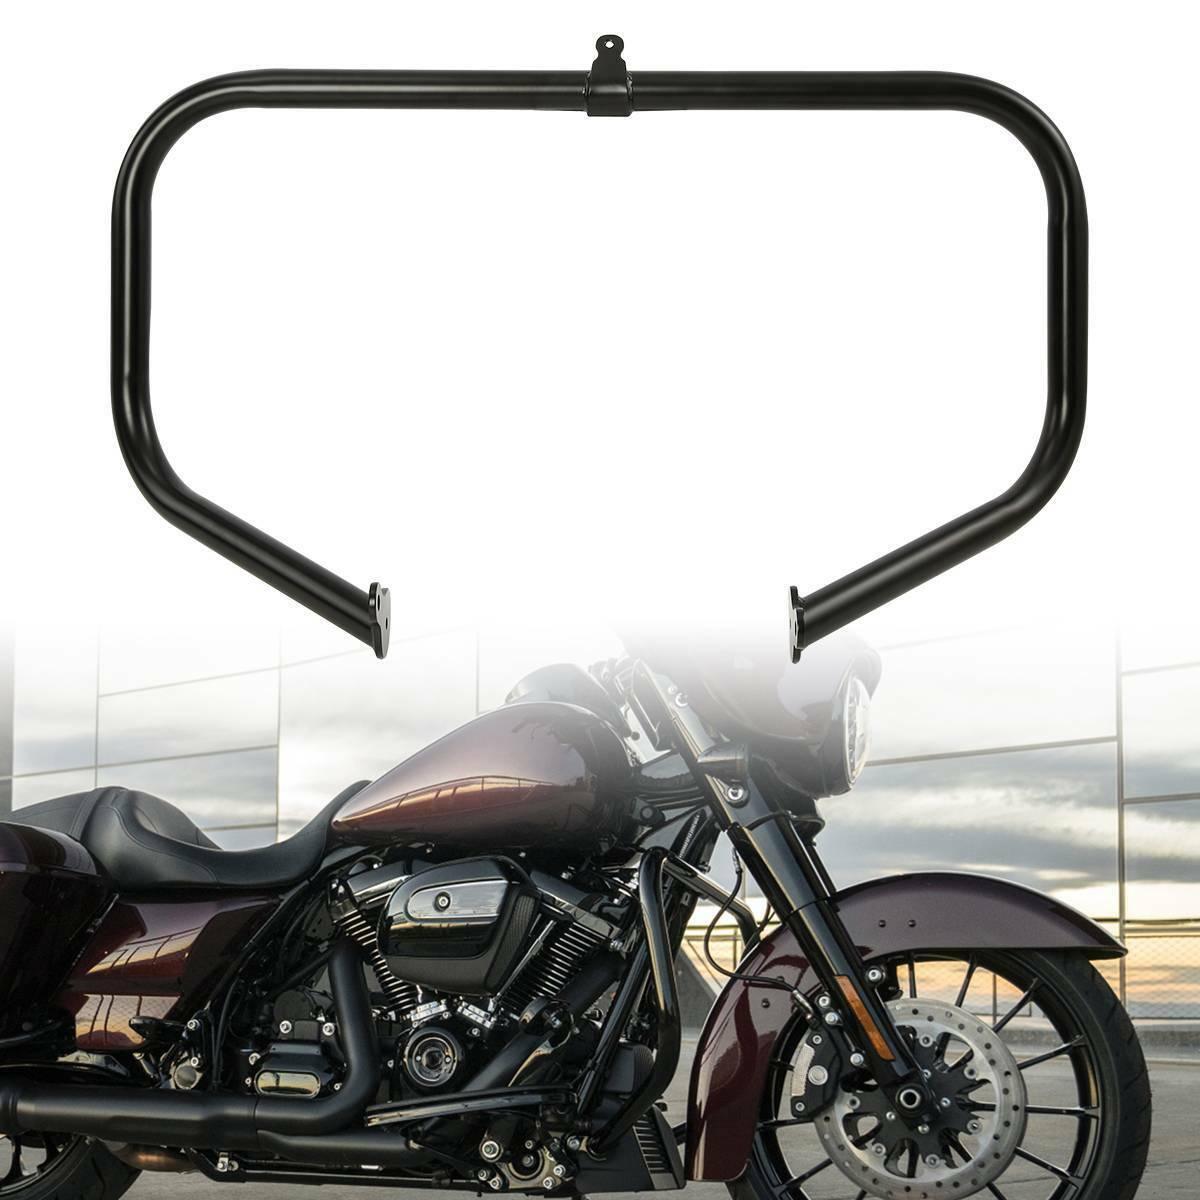 1 1/4" Highway Engine Guard Crash Bar Fit For Harley Touring 97-22 Black/Chrome - Moto Life Products